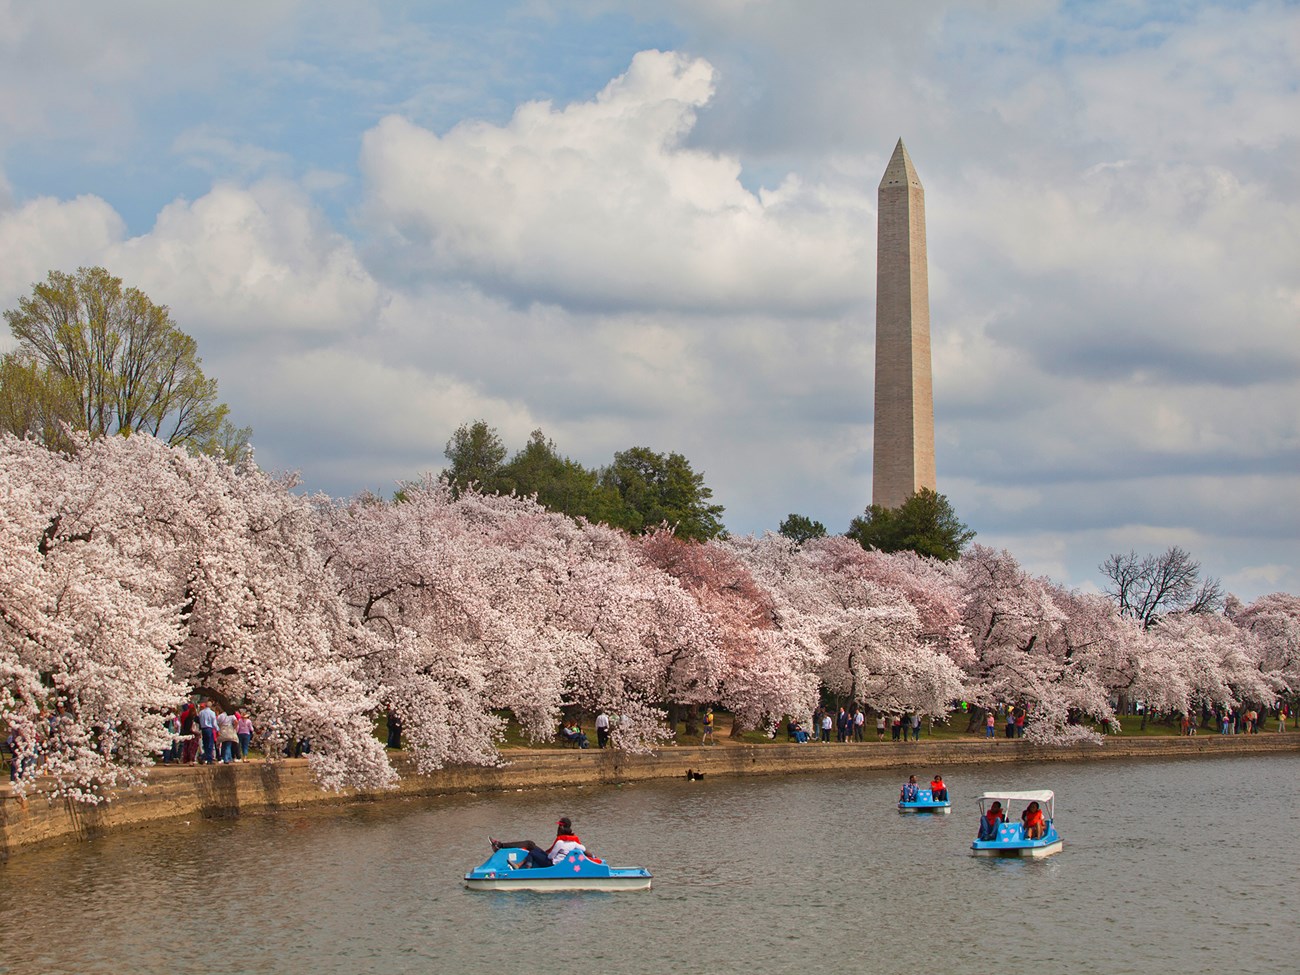 Cherry trees blooming in front of the Washington Monument